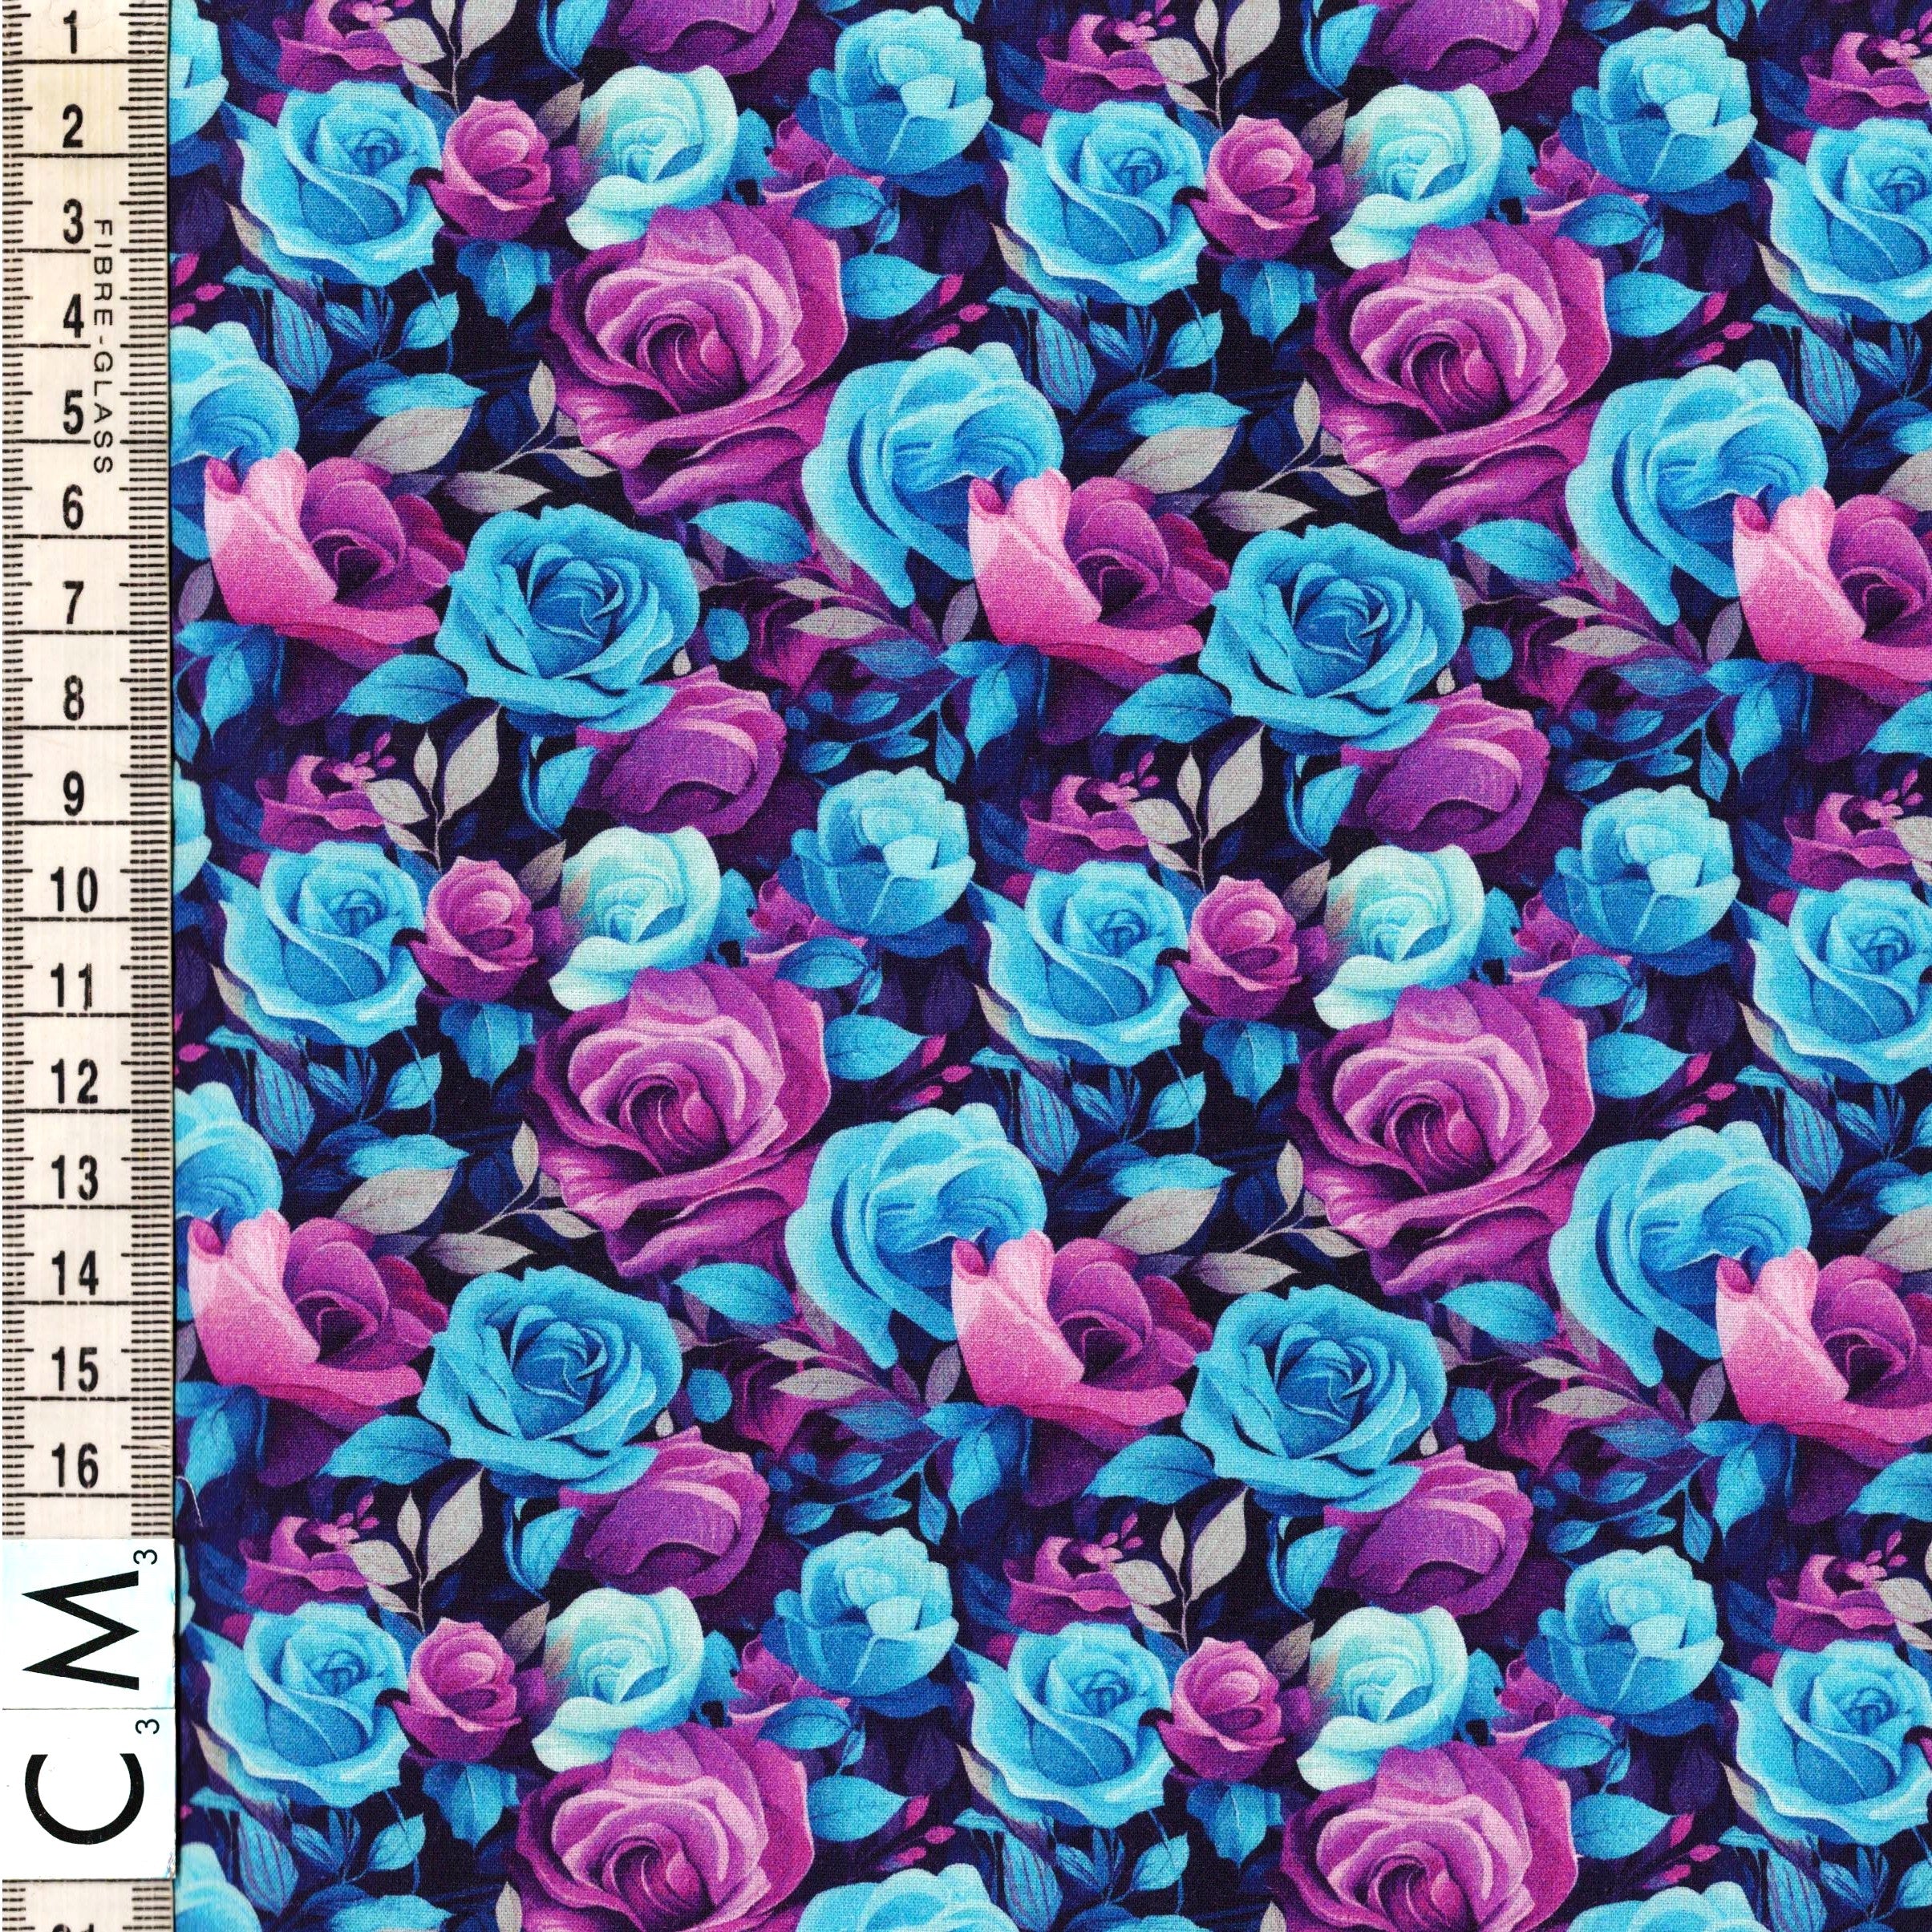 PRE-ORDER Quirky Cotton Flowers Packed Roses Floral Nature Purple Teal (PRE-ORDER QC Purple & Teal Roses )